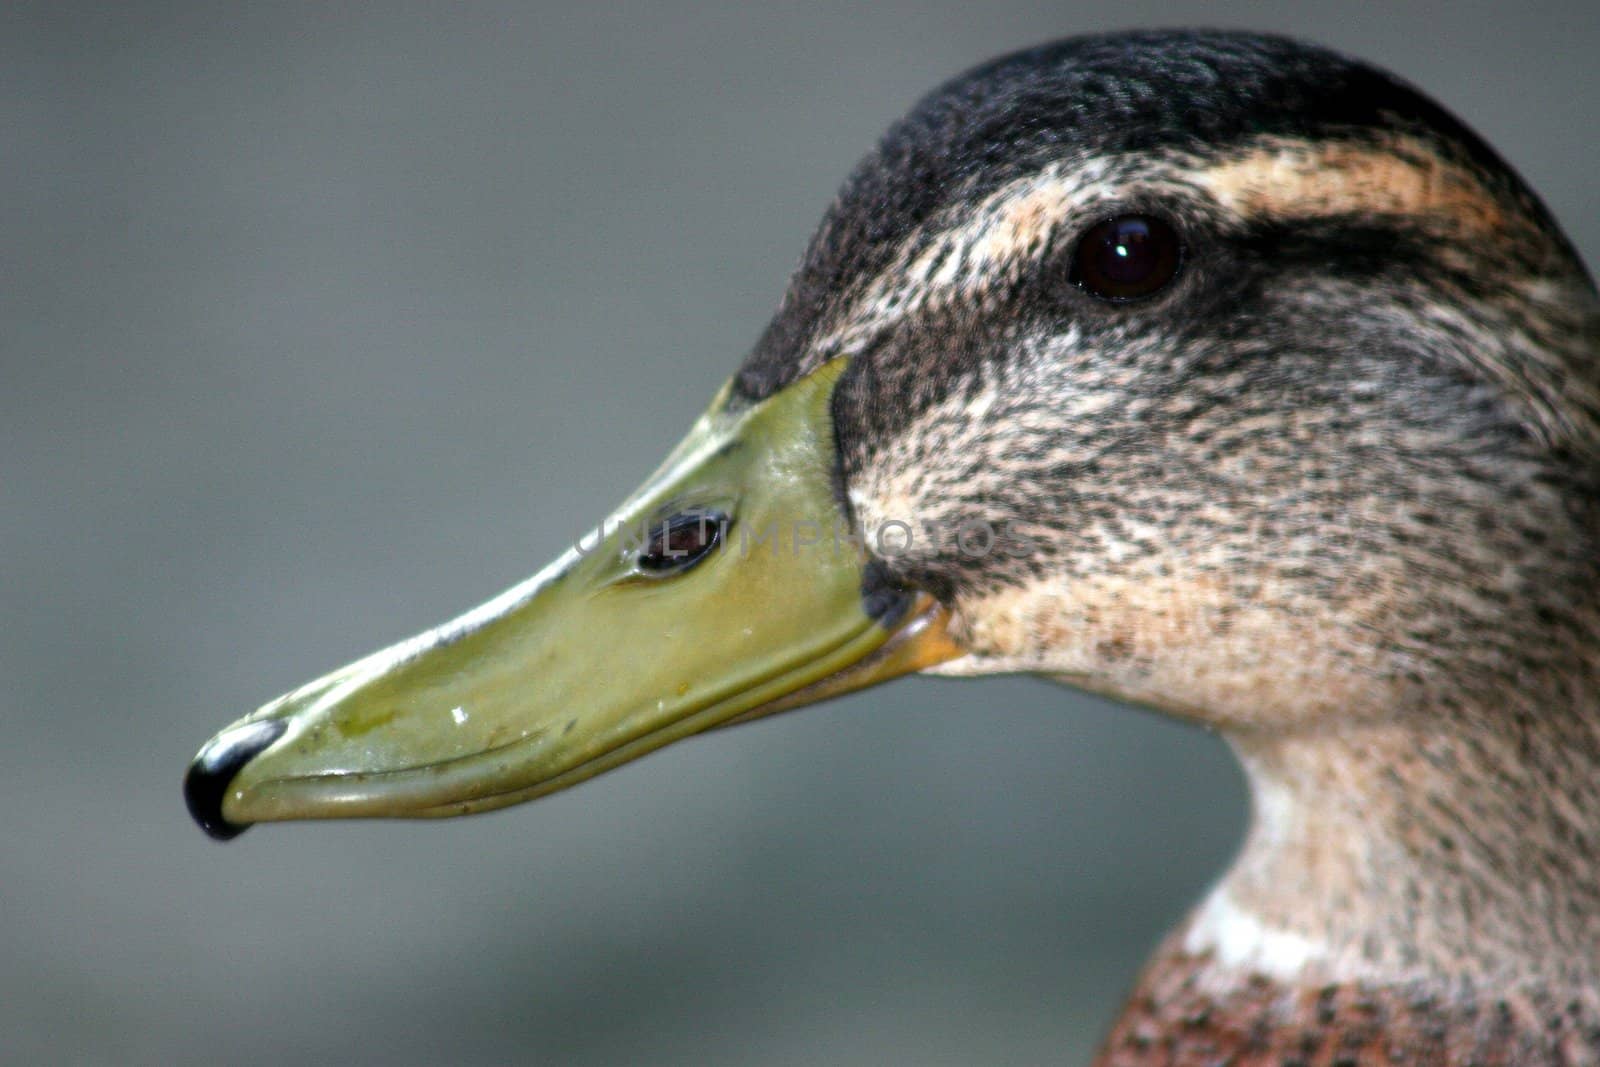 A close up of the face of a duck.